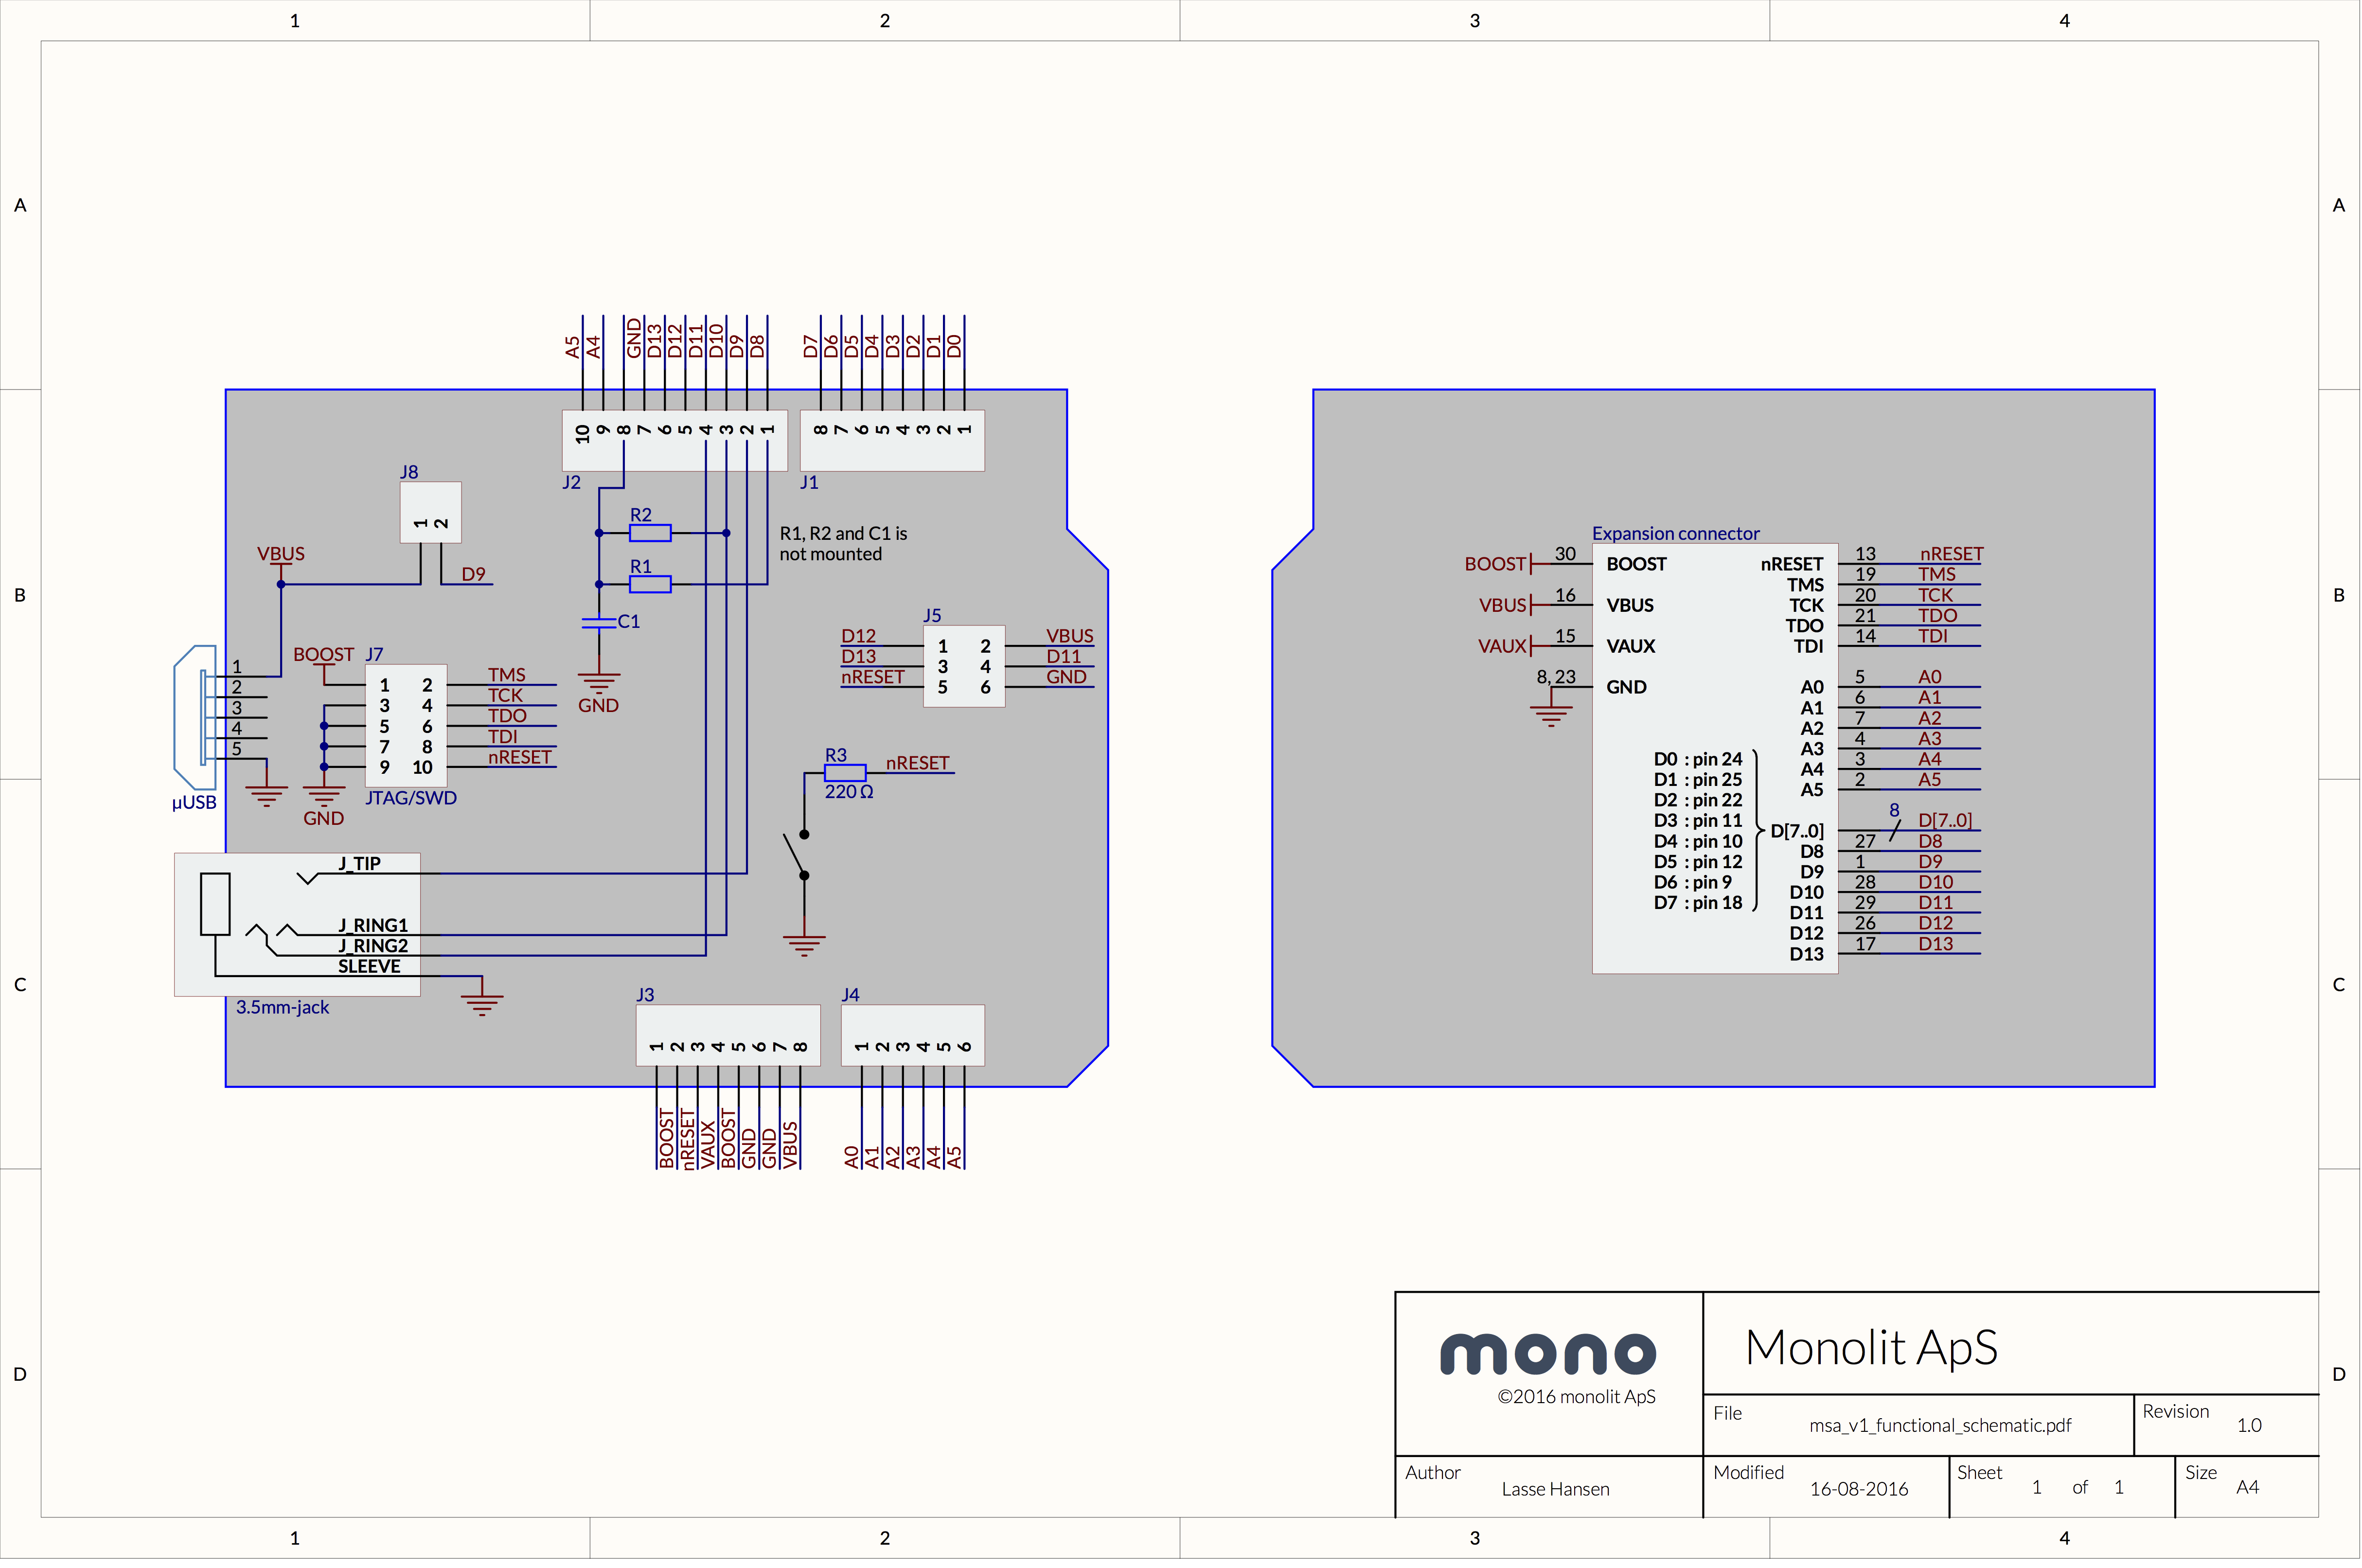 Mono Shield Adapter functional schematic